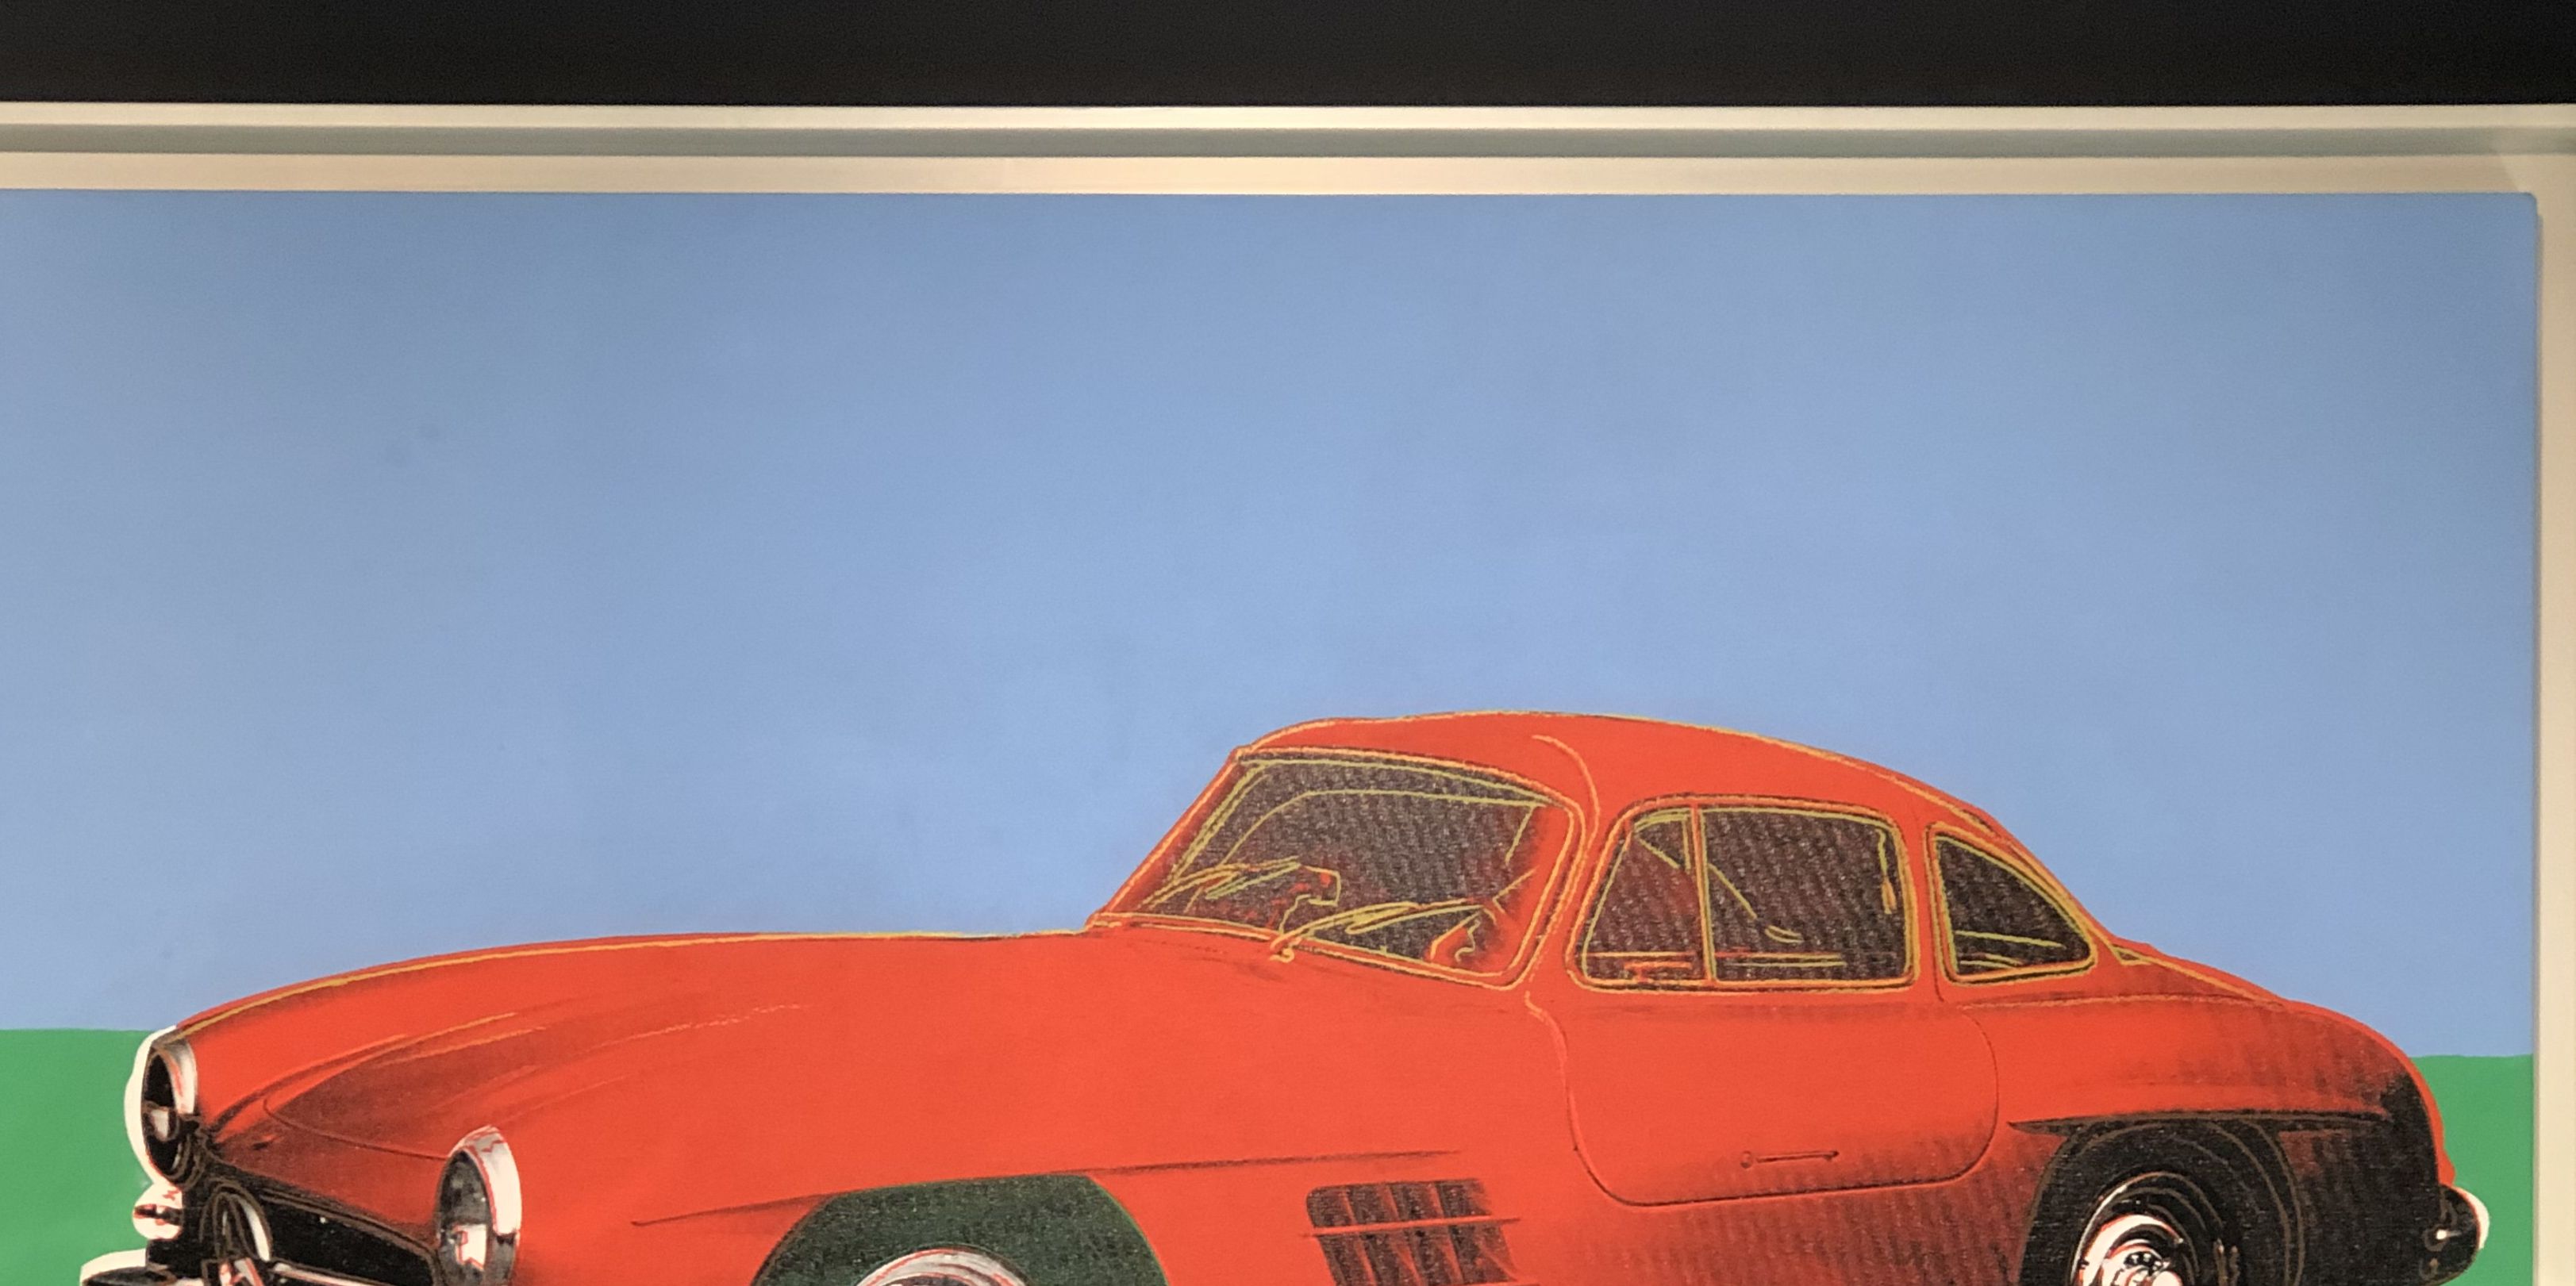 Finding Andy Warhol's Gullwing